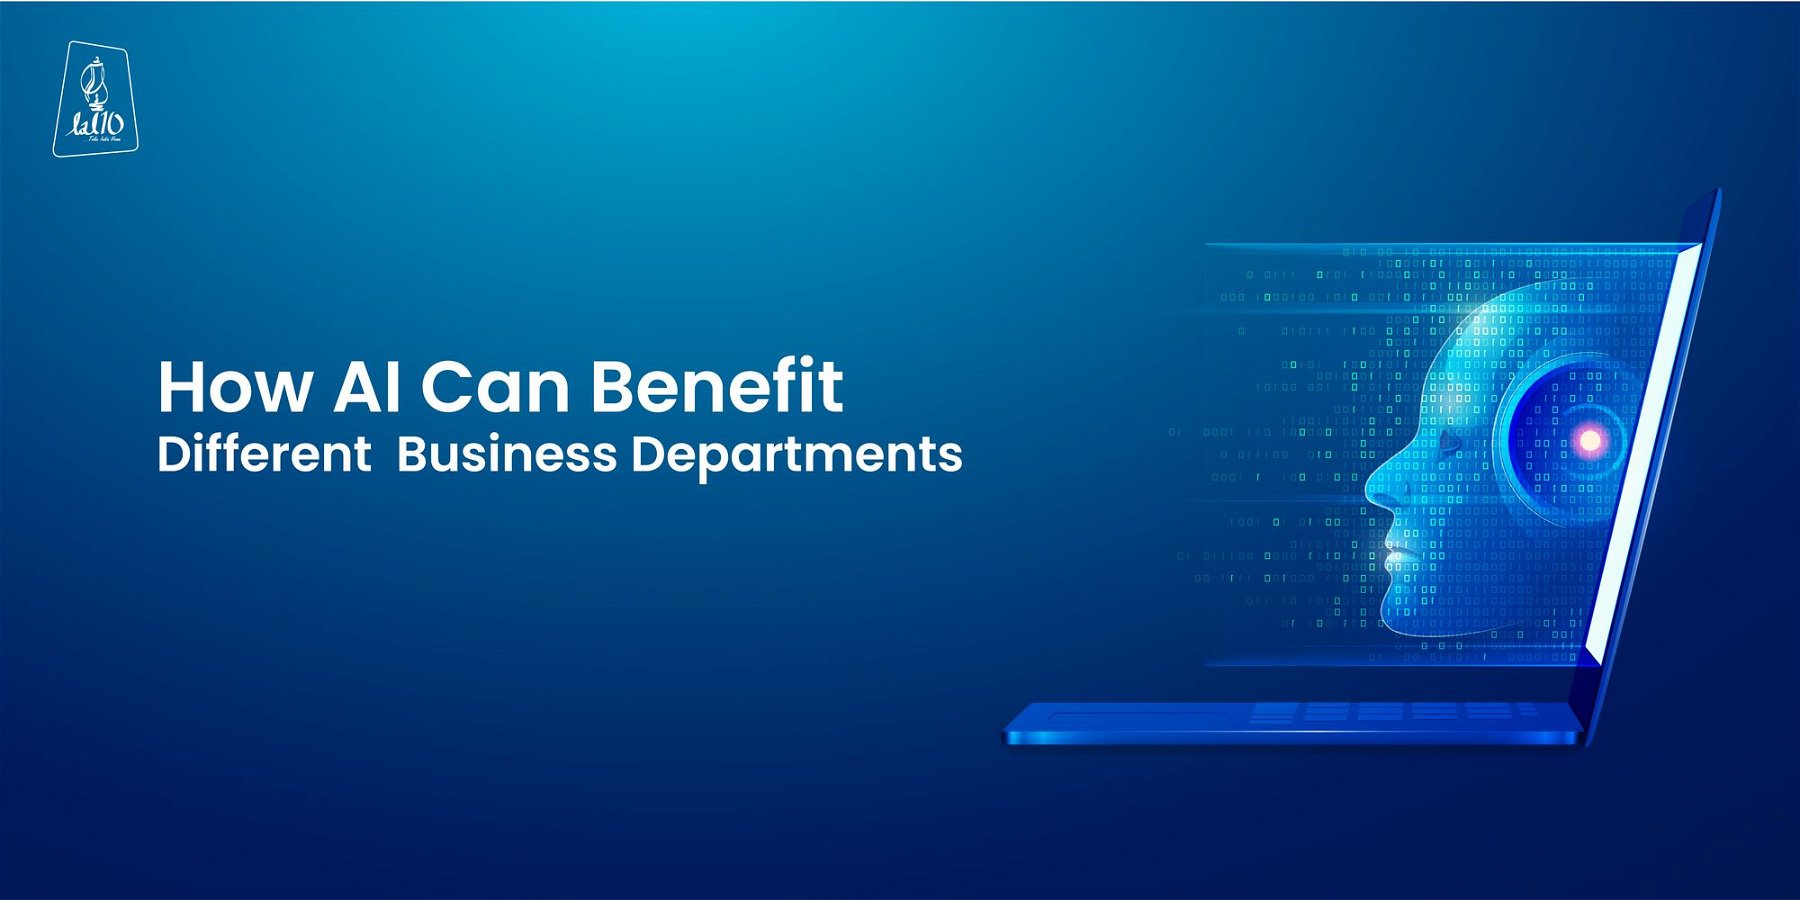 How AI can benefit different business departments